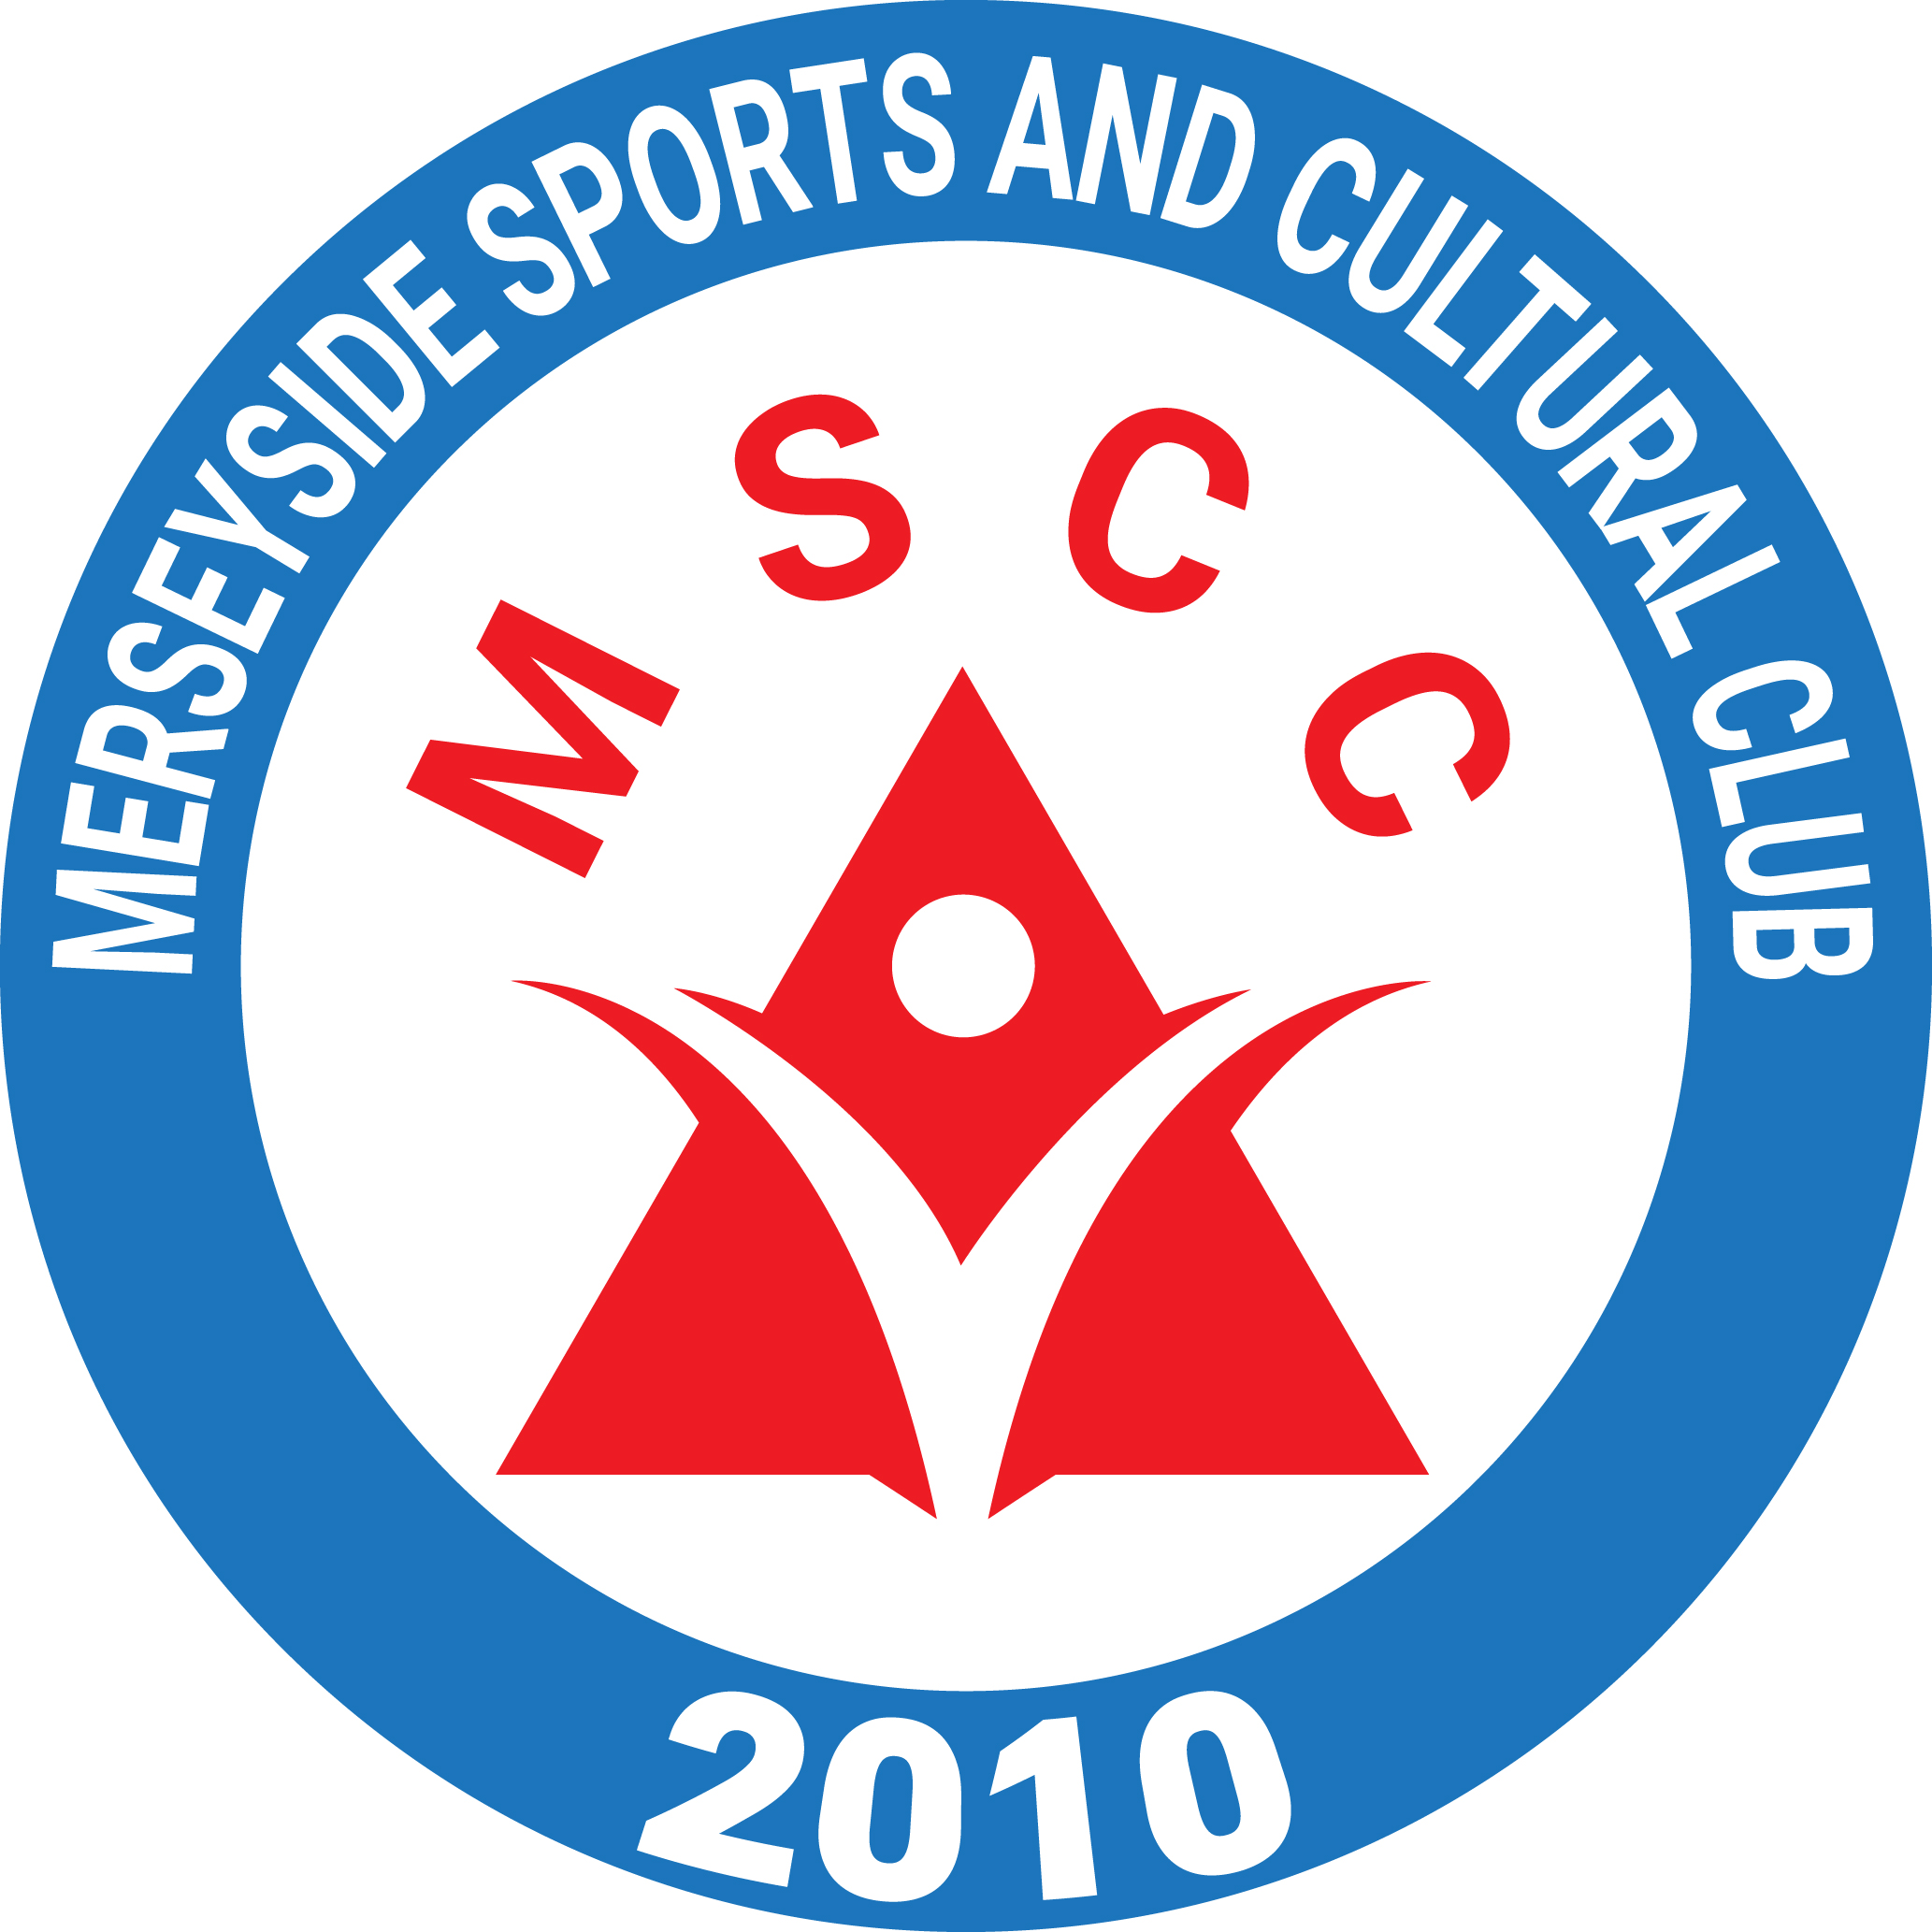 Merseyside Sports and Cultural CC